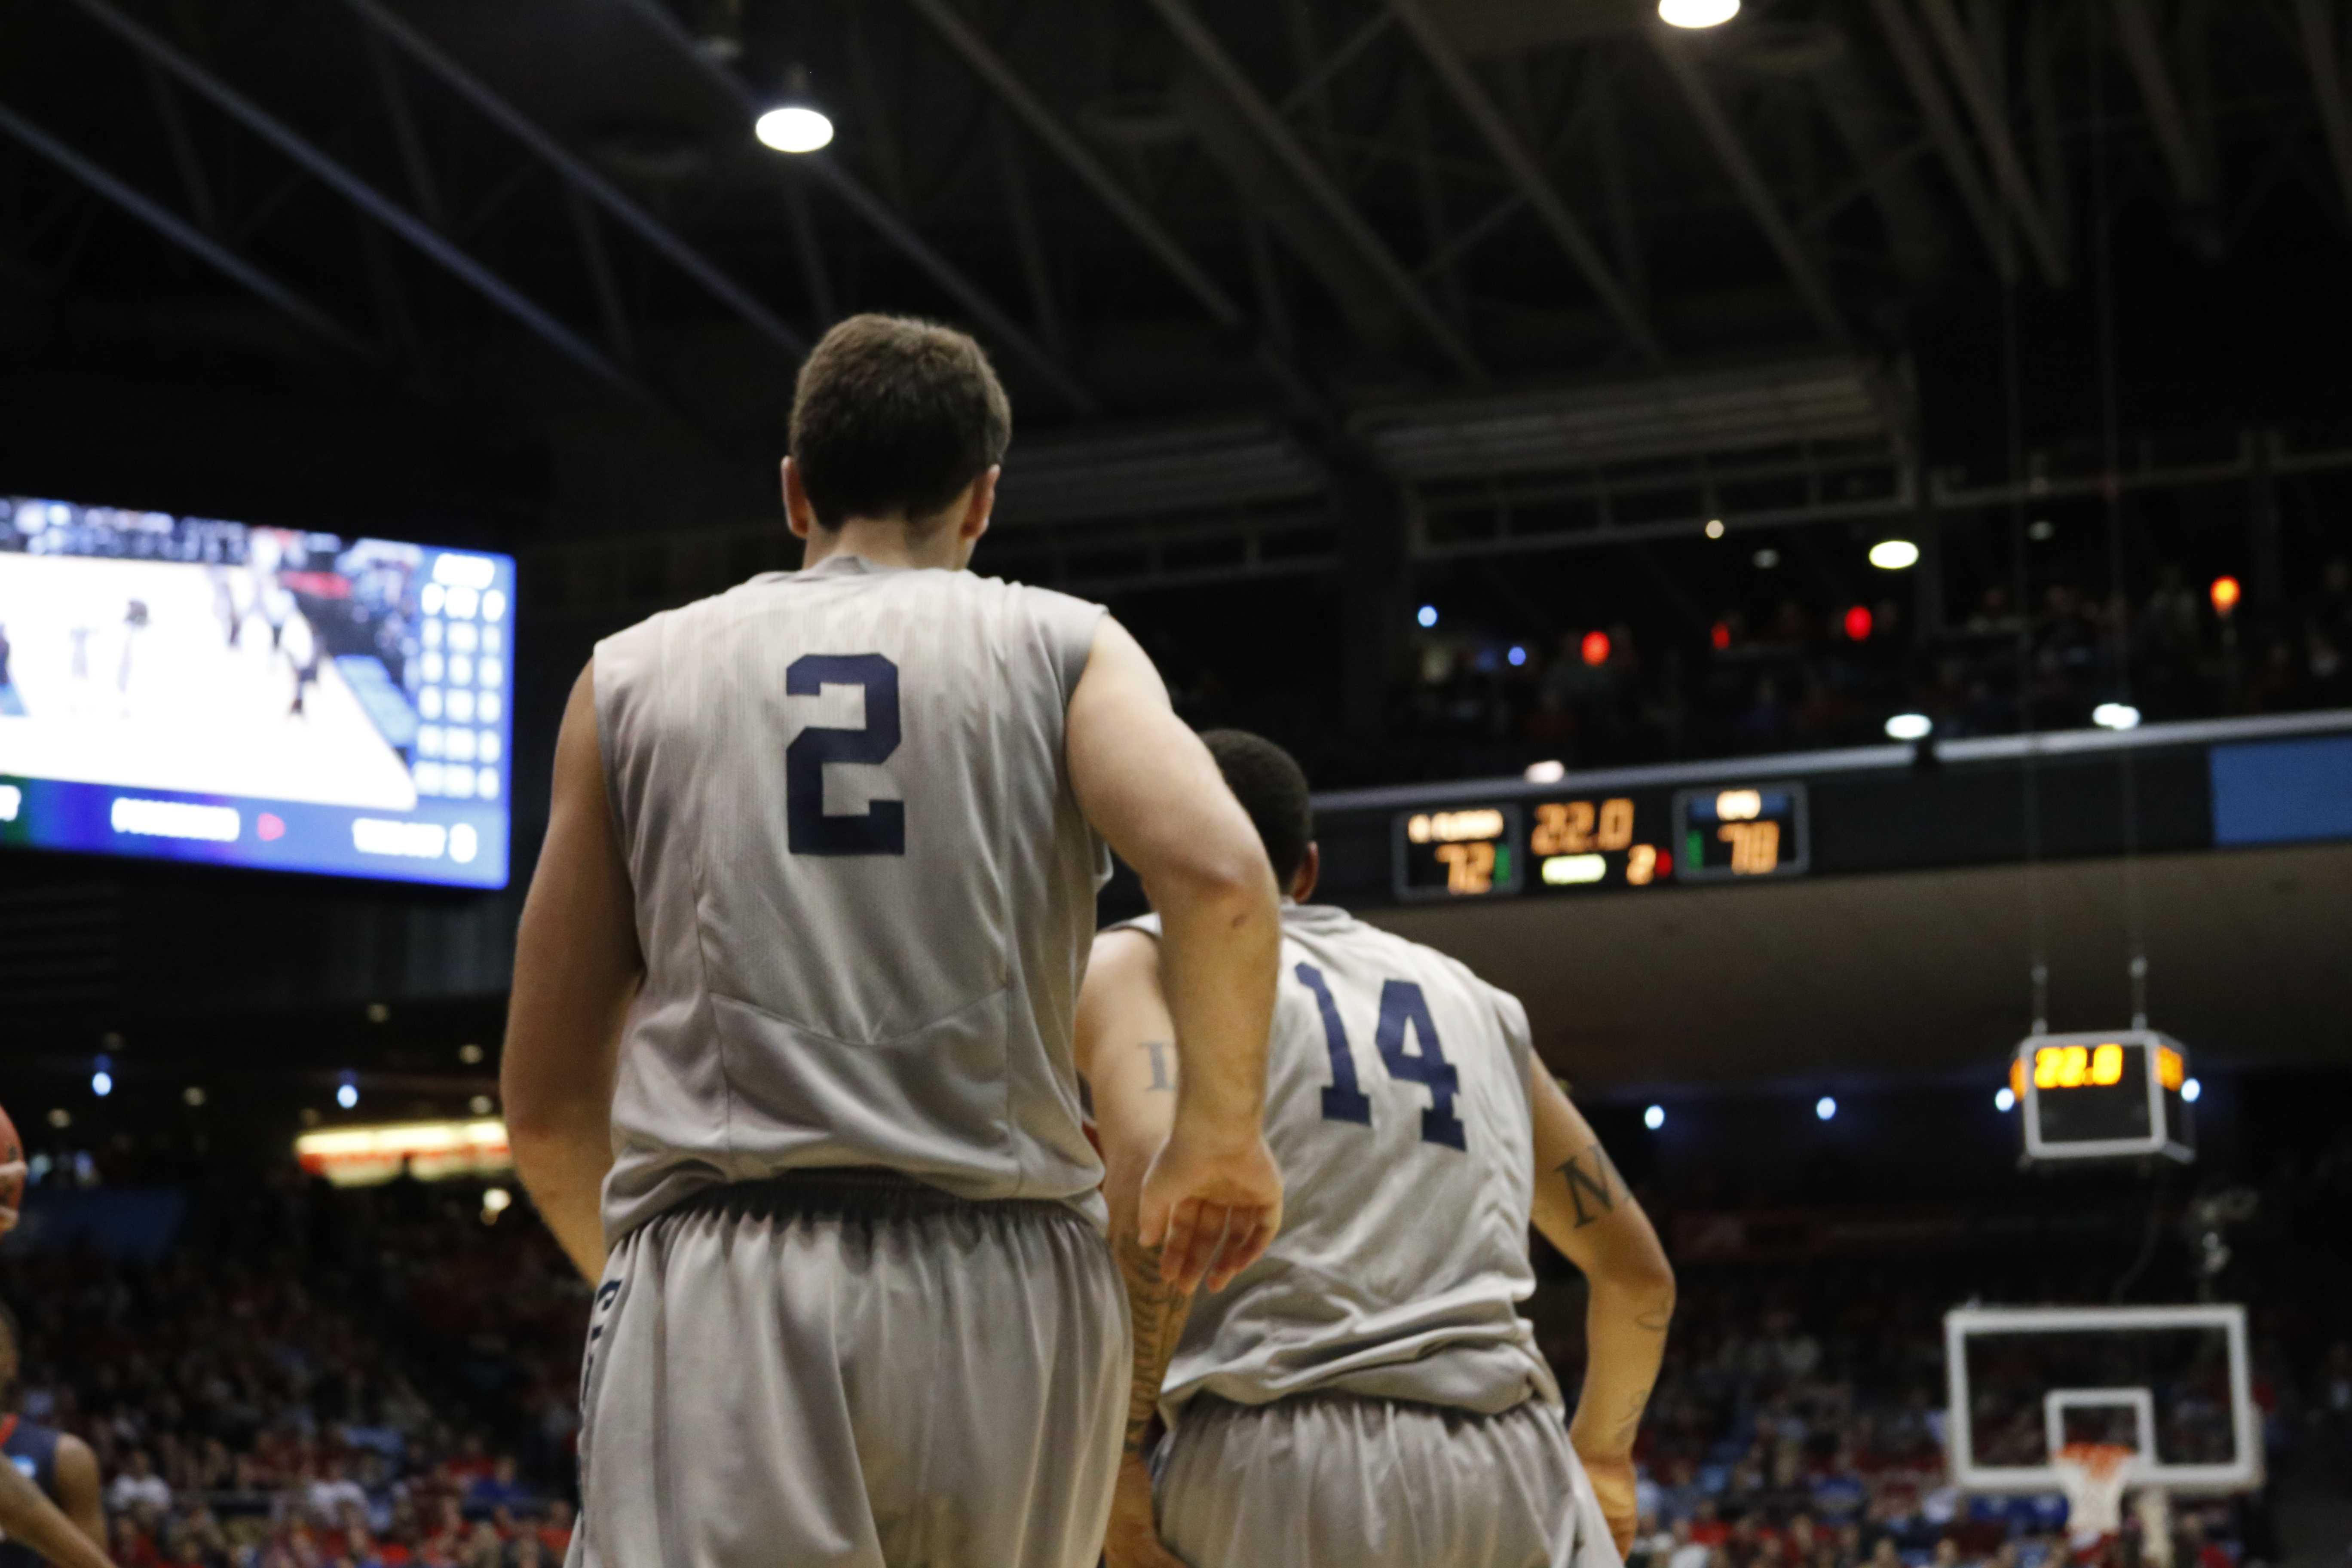 Beau Beech and Dallas Moore both finished with 31 points against LSU. Photo by Morgan Purvis